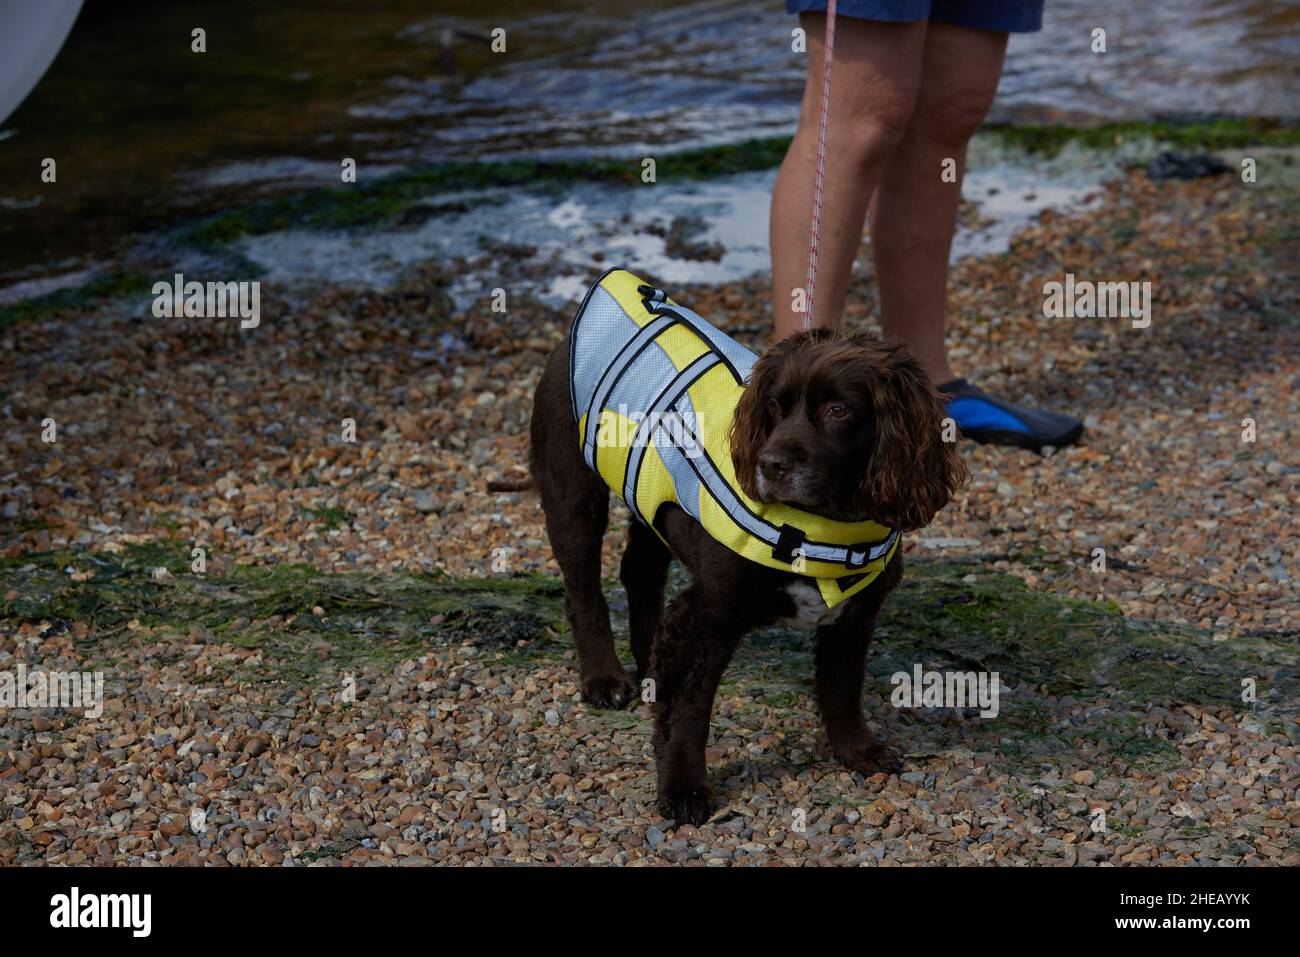 A dog seen with a swimming vest. Stock Photo